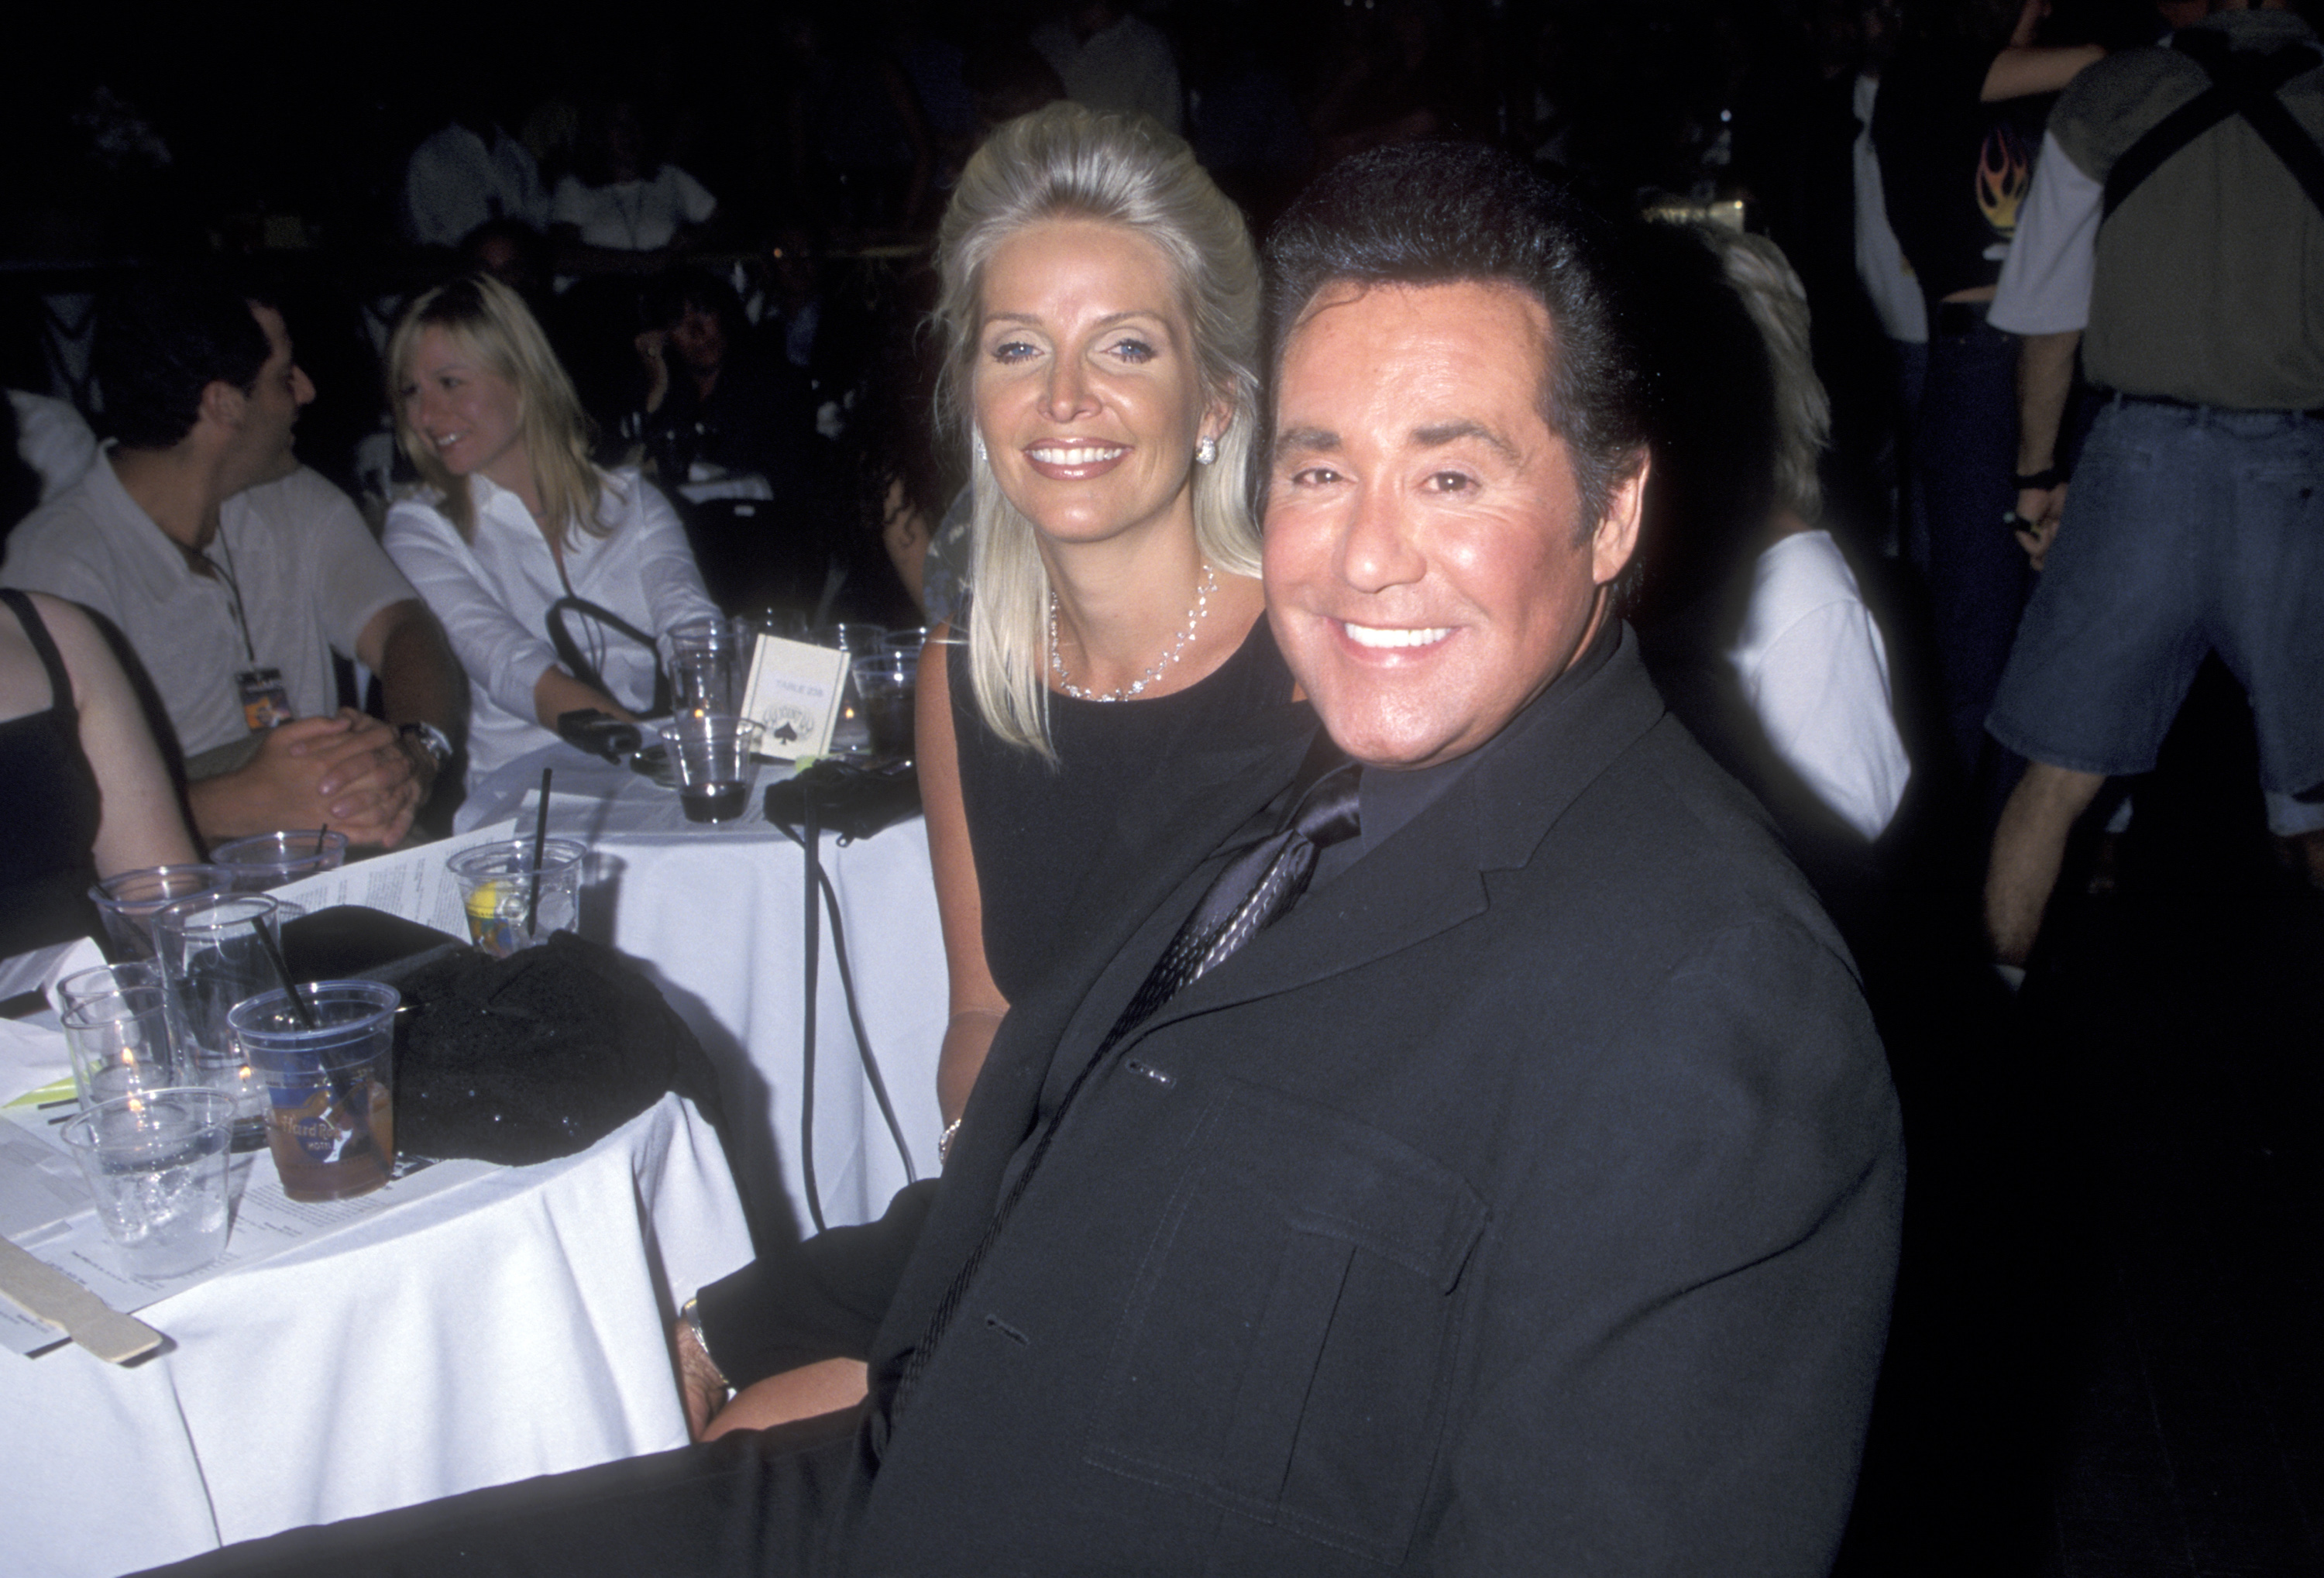 Wayne Newton and wife Kathleen McCrone at the Grand Re-Opening of the Hard Rock Hotel on May 21, 1999 in Las Vegas, Nevada | Source: Getty Images